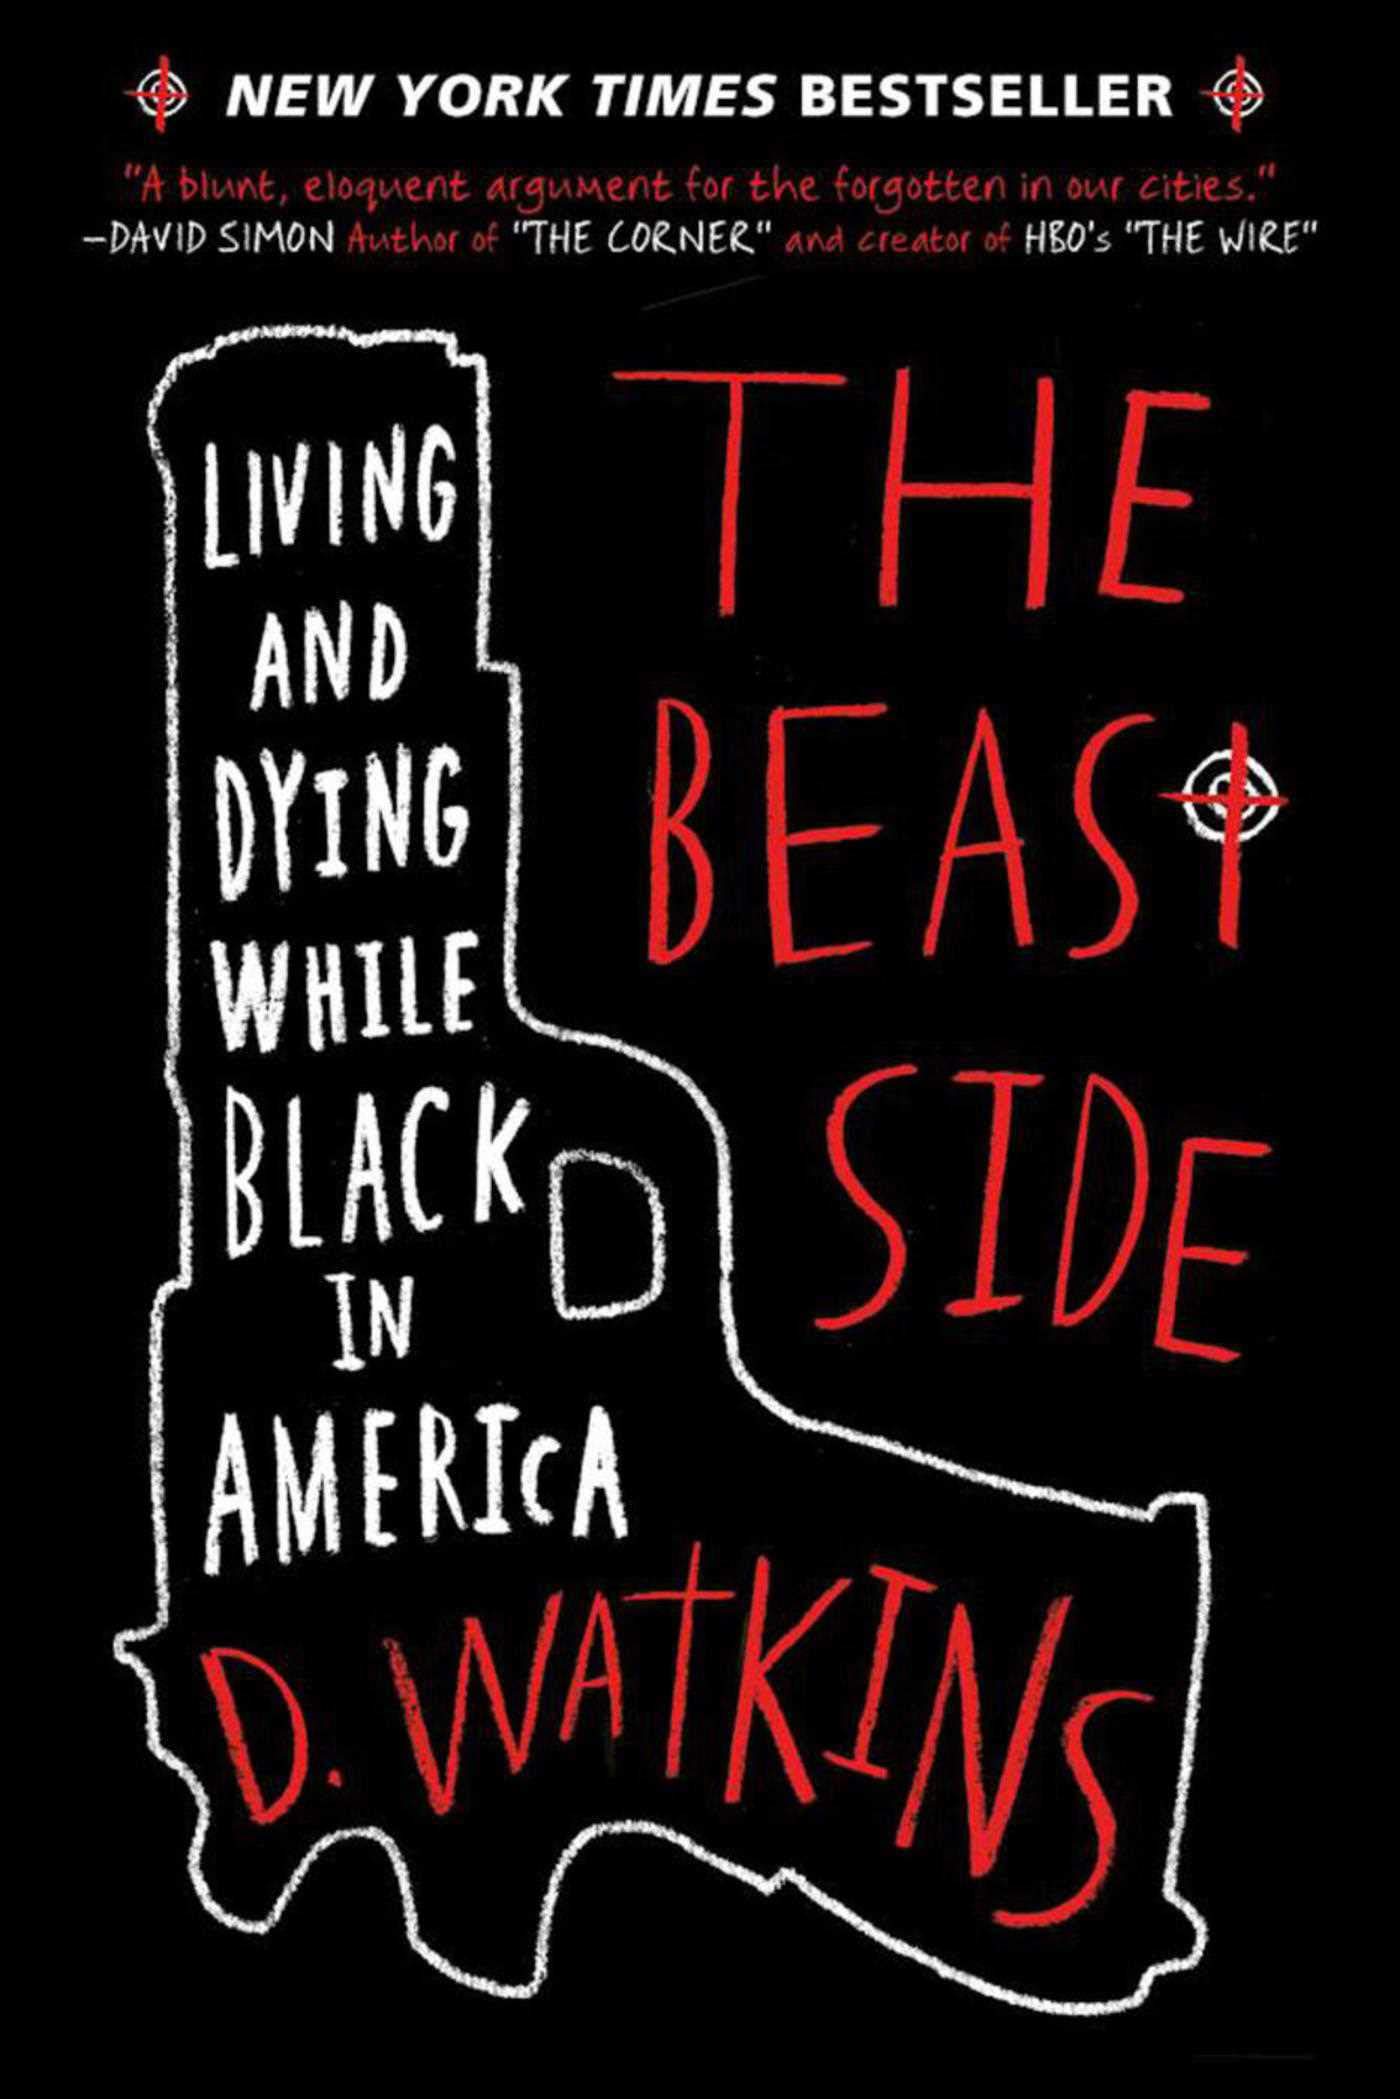 The Beast Side: Living While Black in America